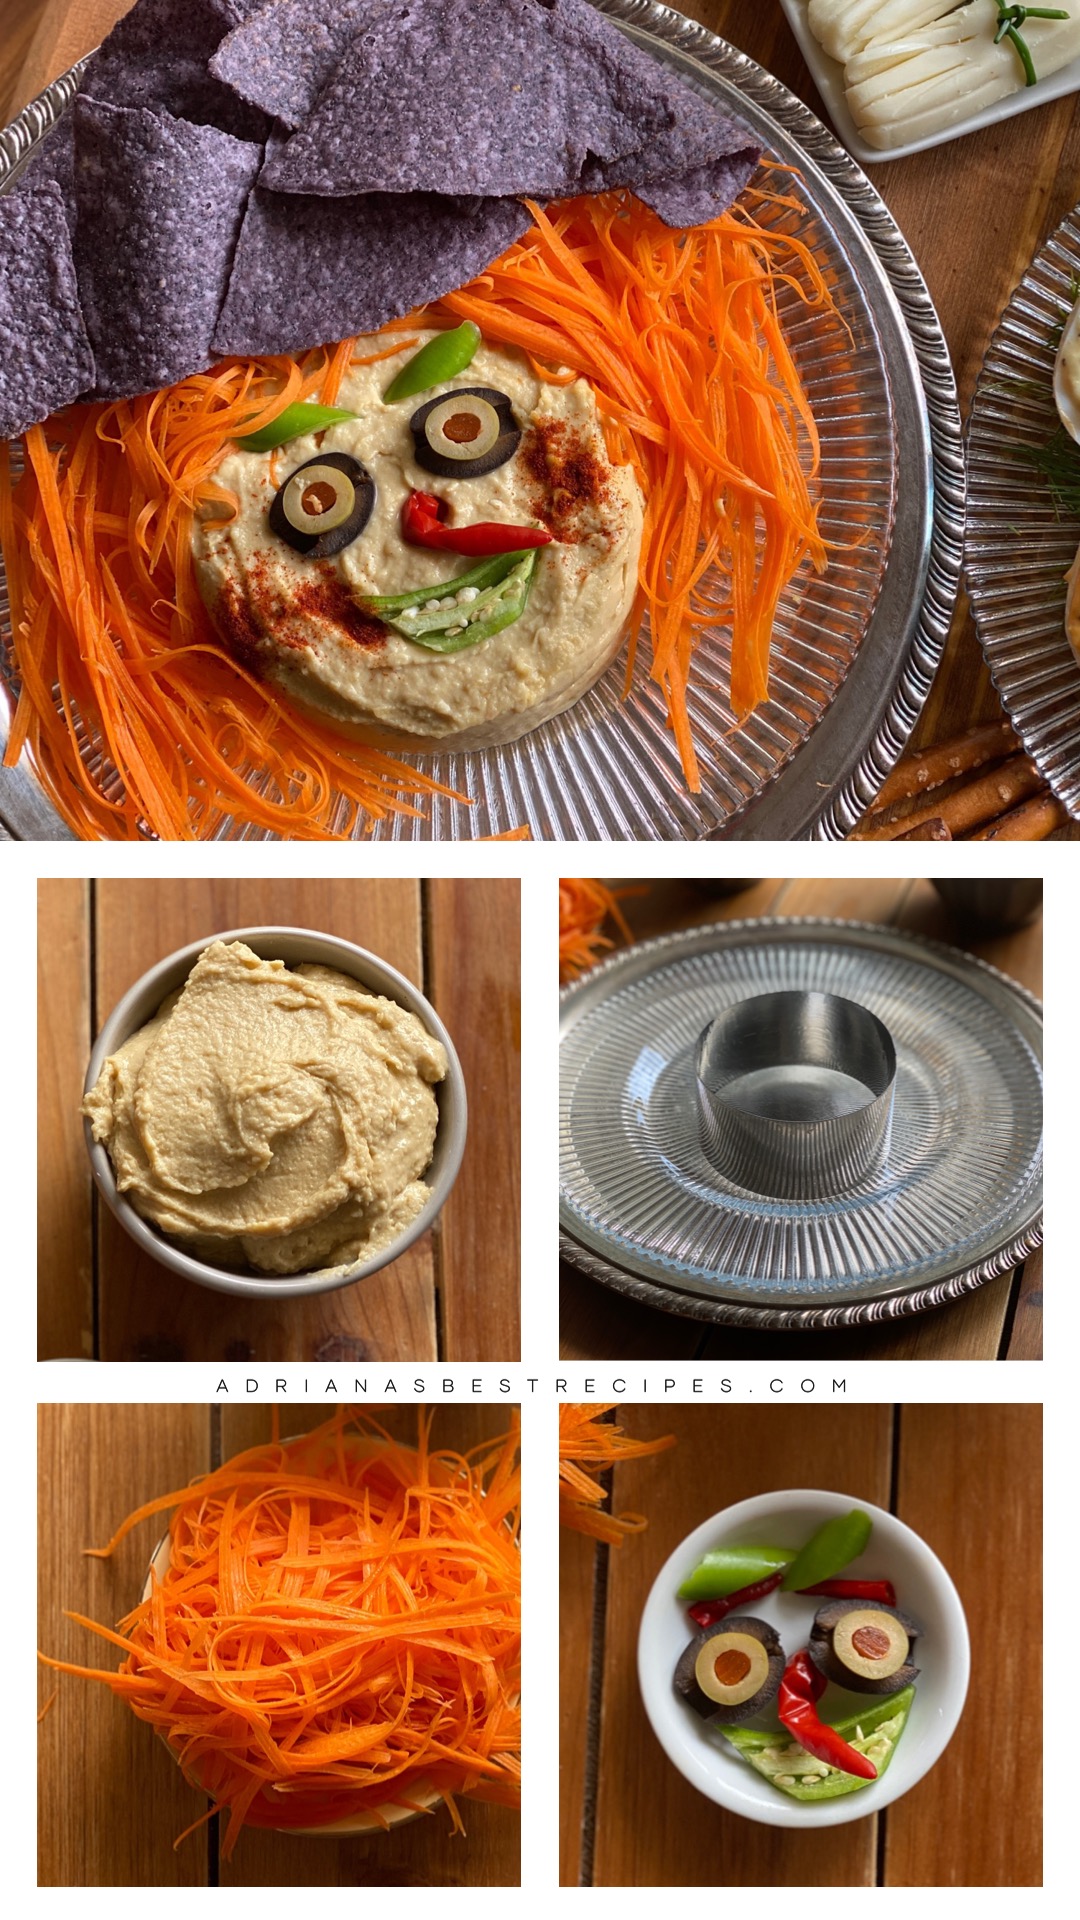 This is the step by step image showing how to make the Hummus Witch Platter for Halloween